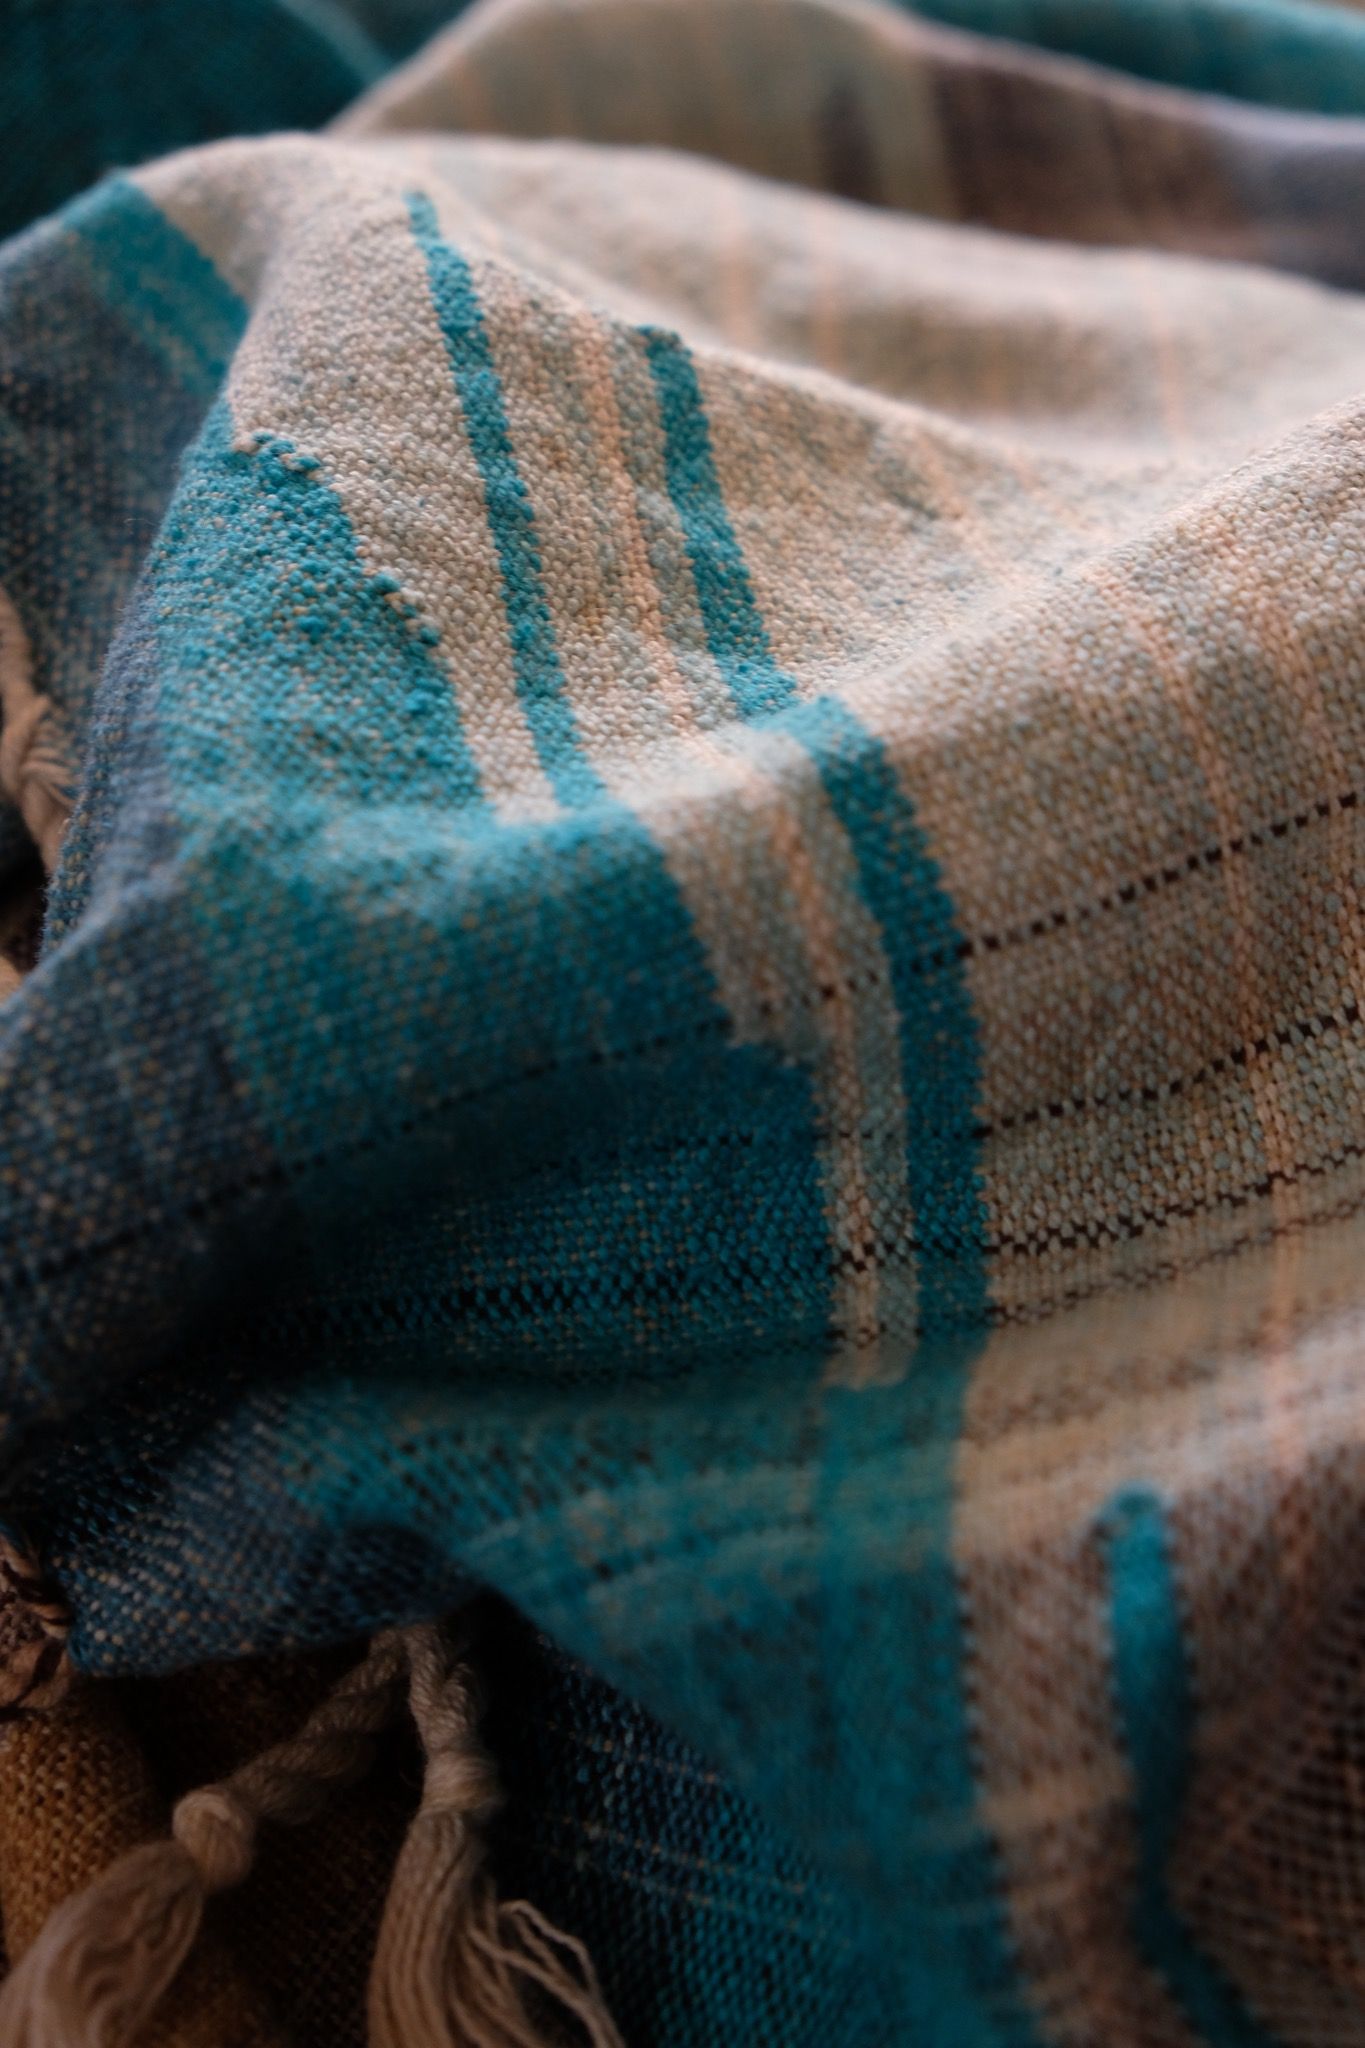 Details of Handwoven fabric in all shades of blue, with details of white and golden yellow, laid out on a wood floor.